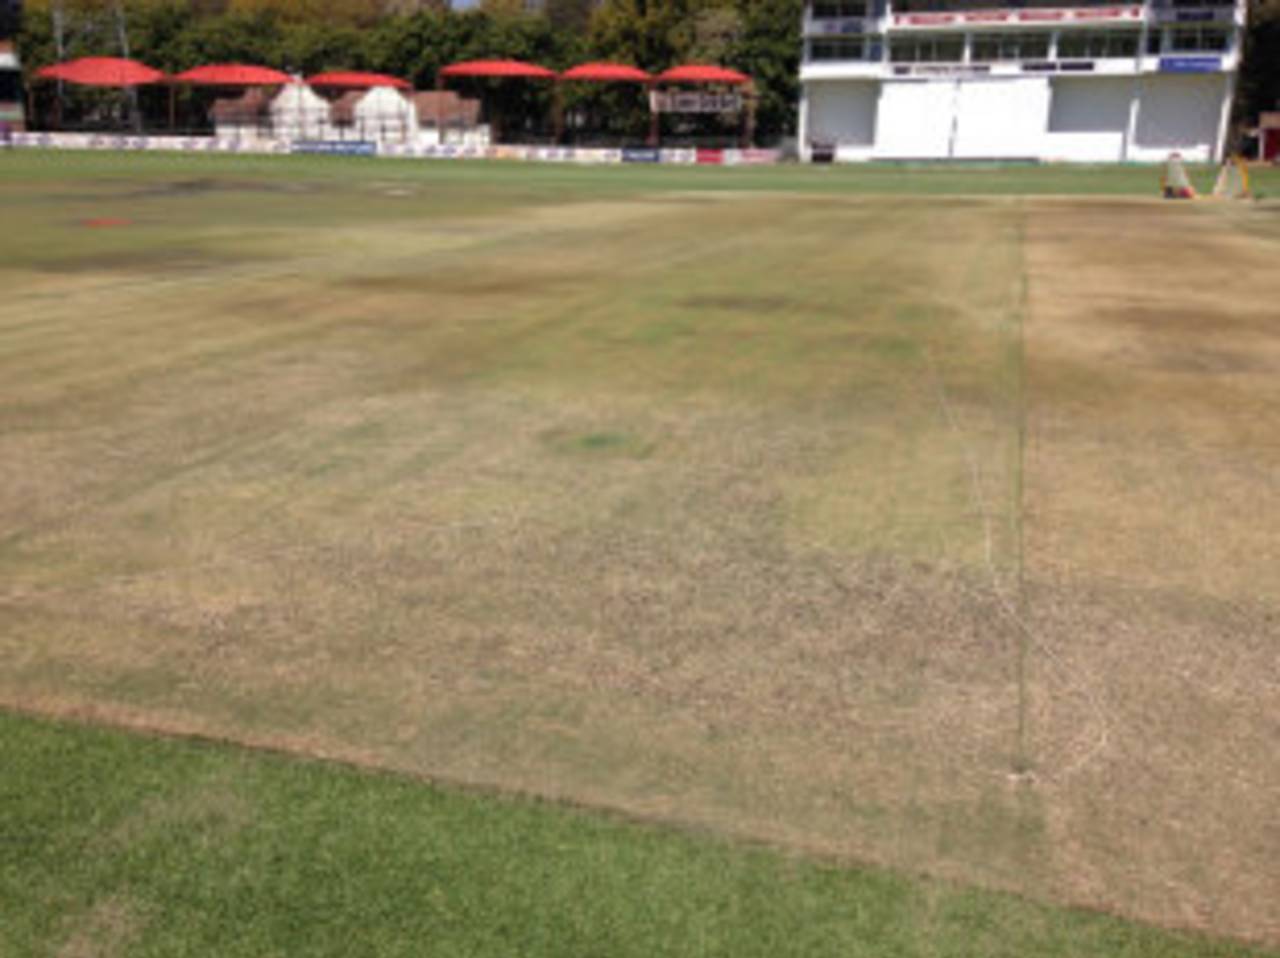 The ground staff at the Harare Sports Club have not decided which pitch to use for the Test&nbsp;&nbsp;&bull;&nbsp;&nbsp;ESPNcricinfo Ltd